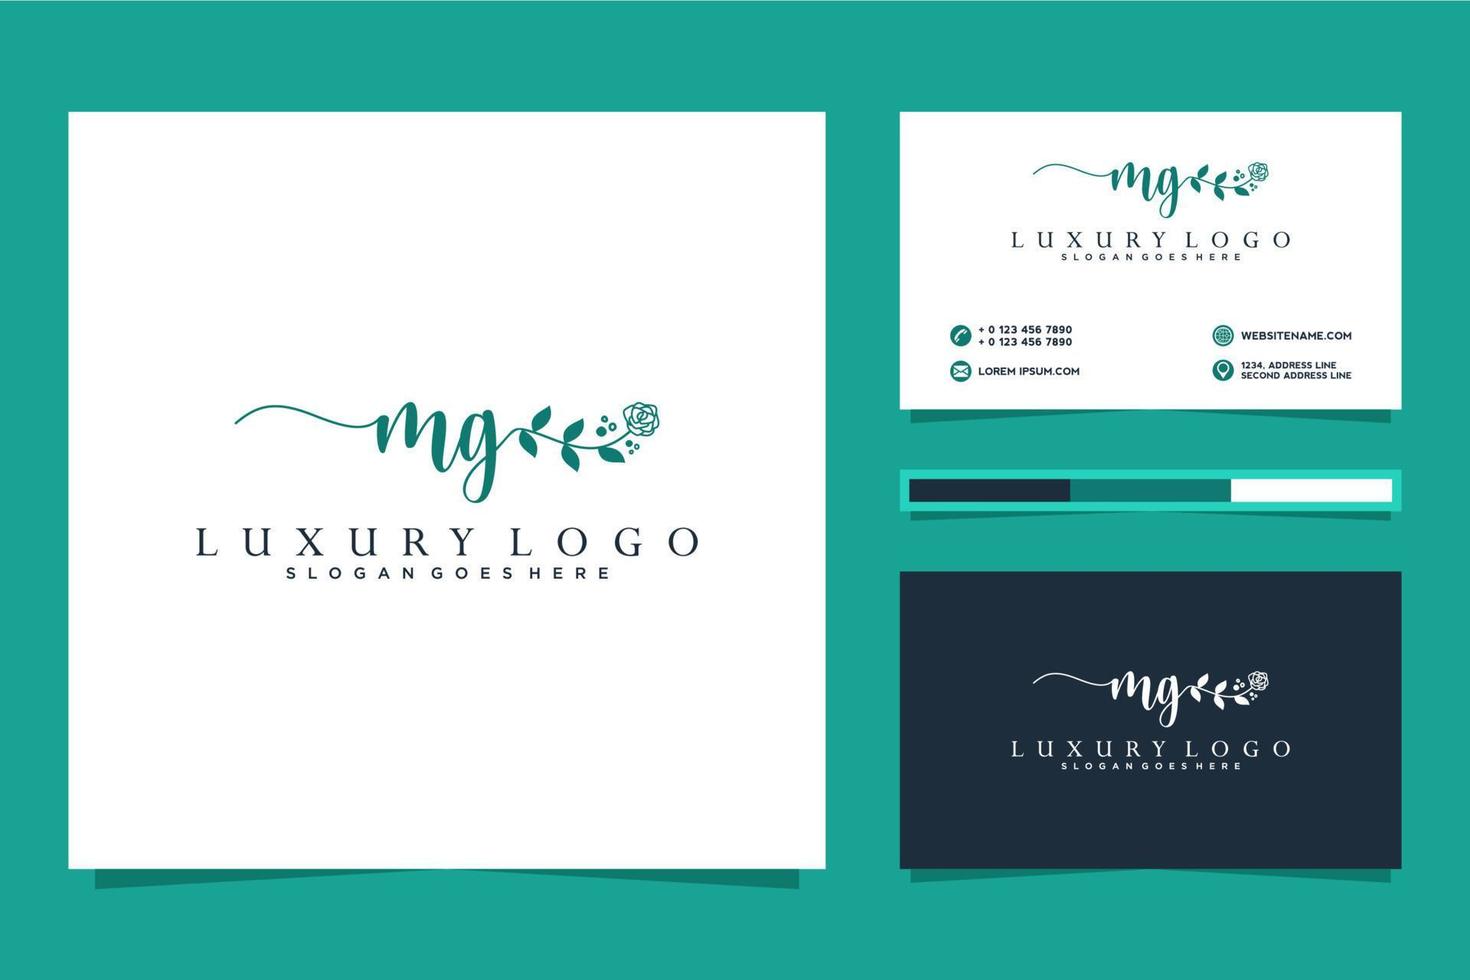 Initial MG Feminine logo collections and business card template Premium Vector